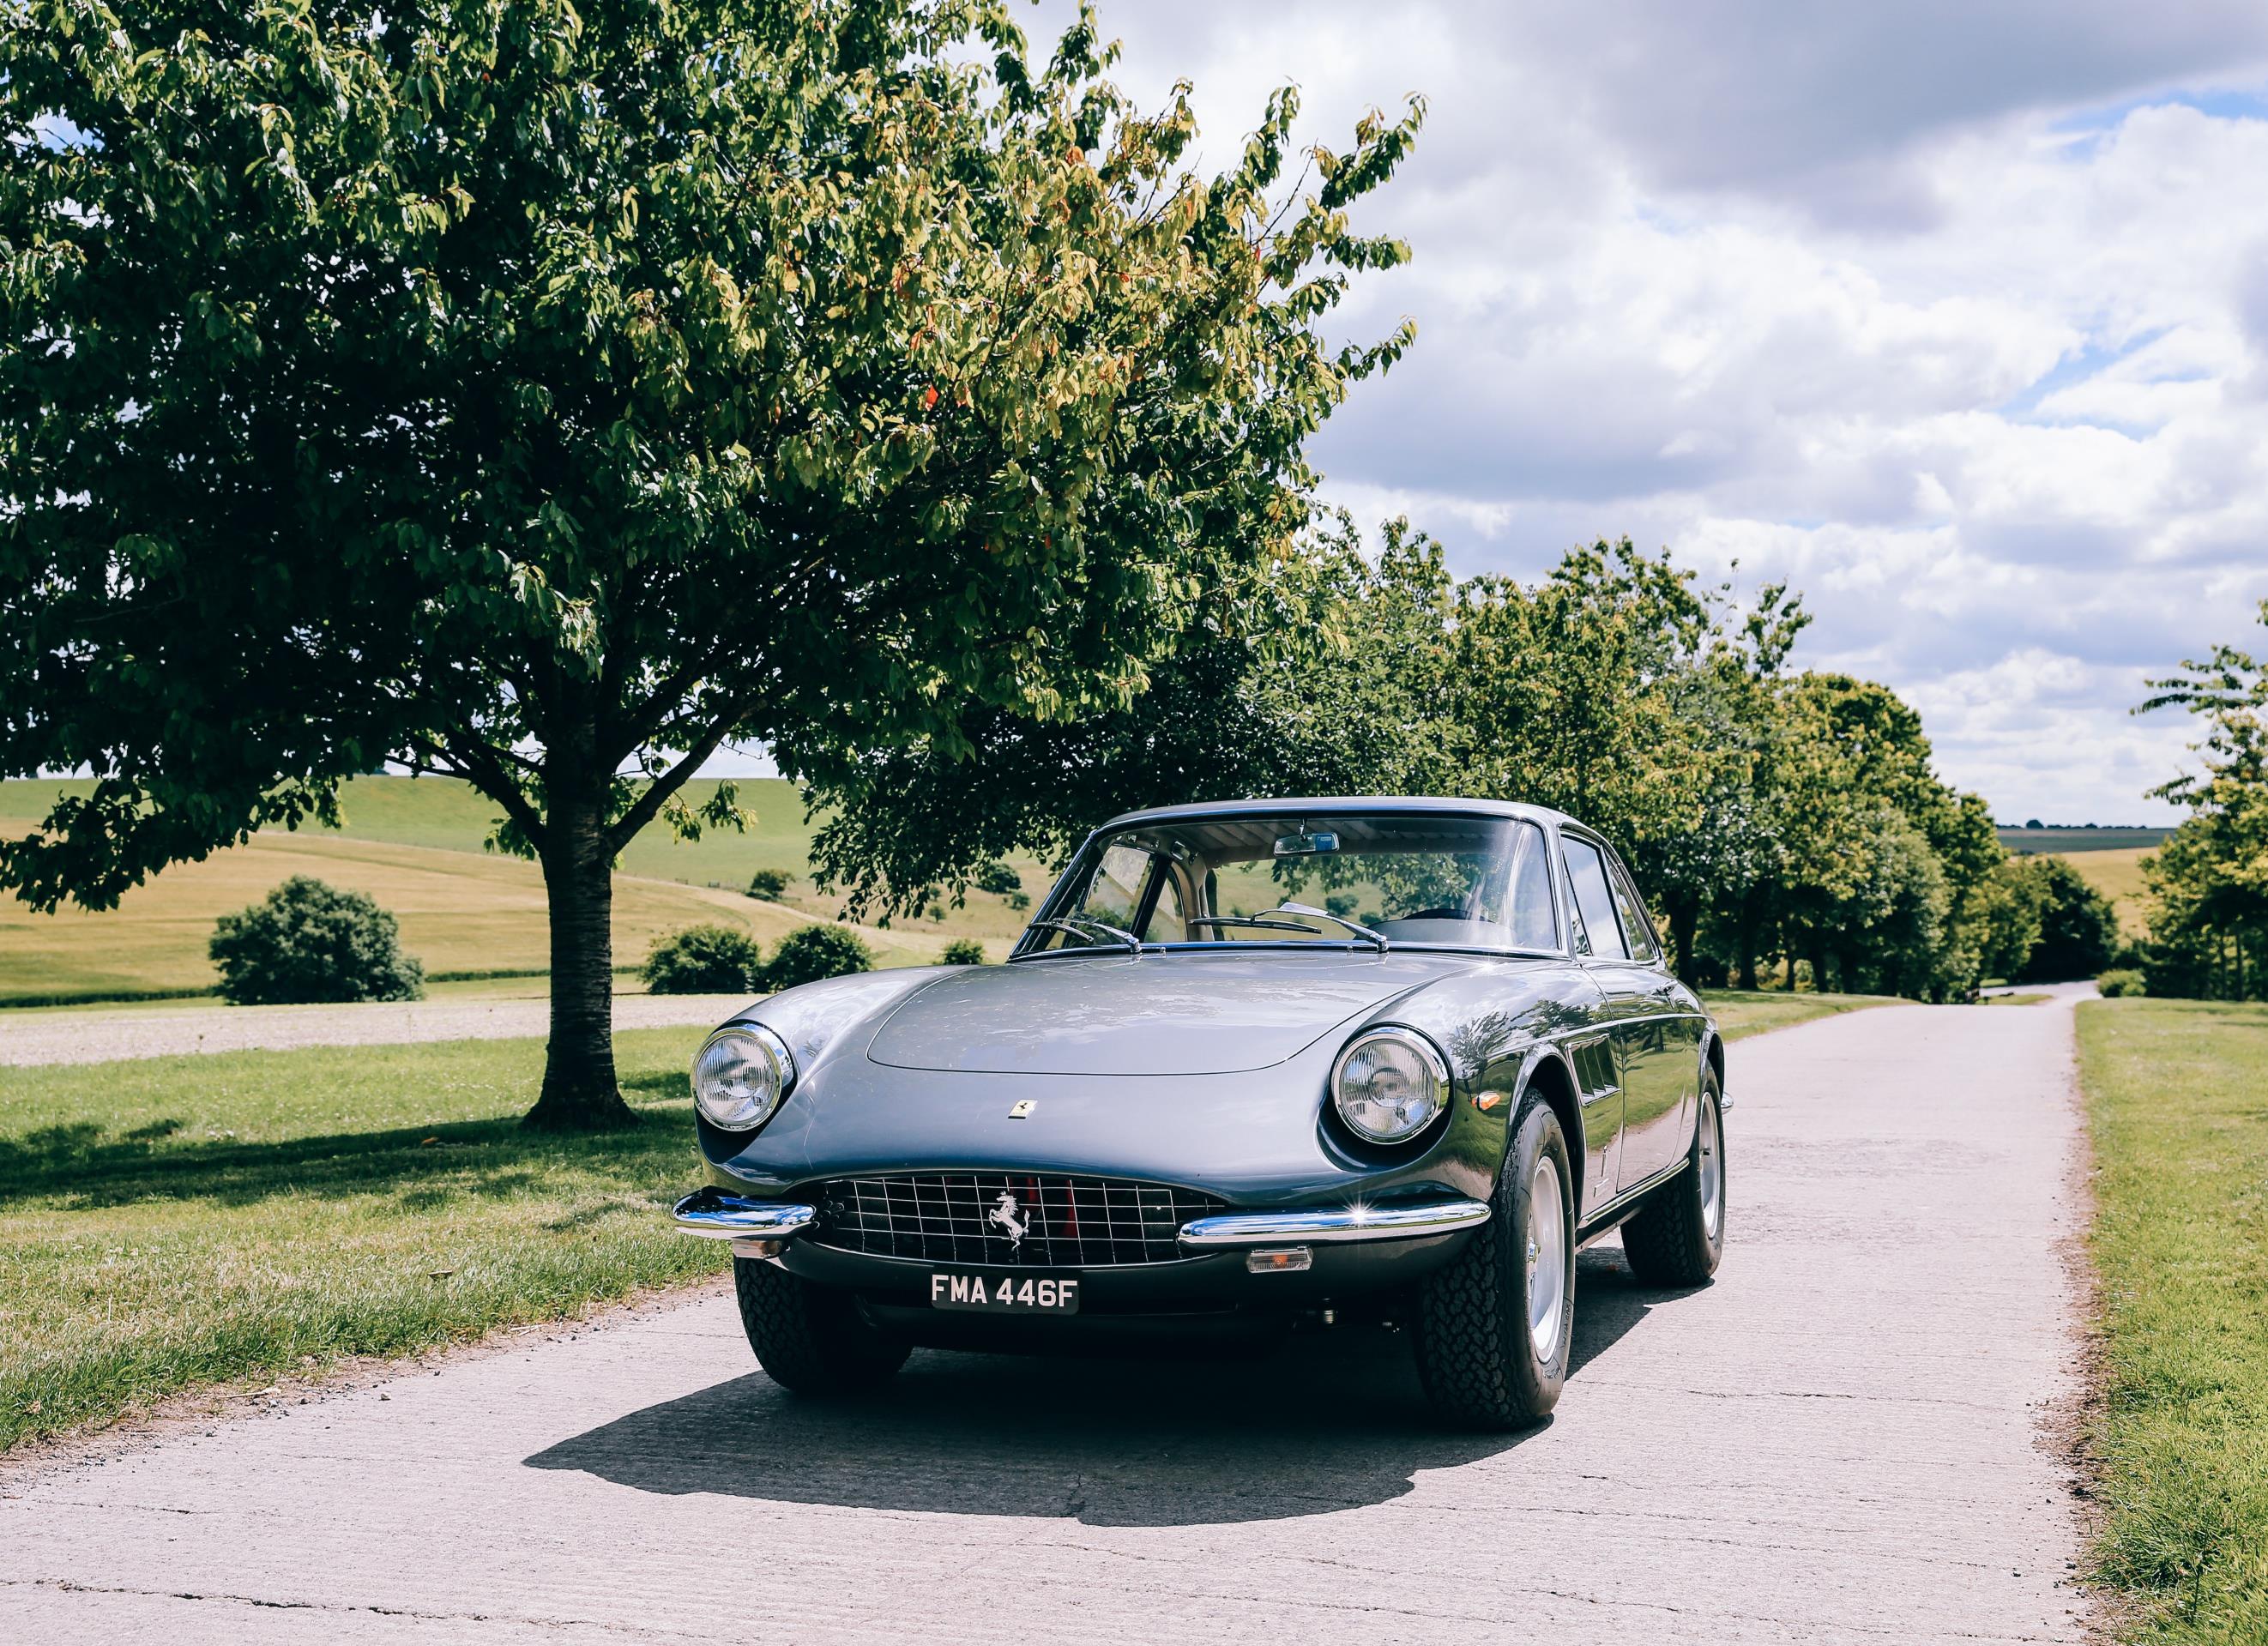 Salon Prive is a high-end motoring event